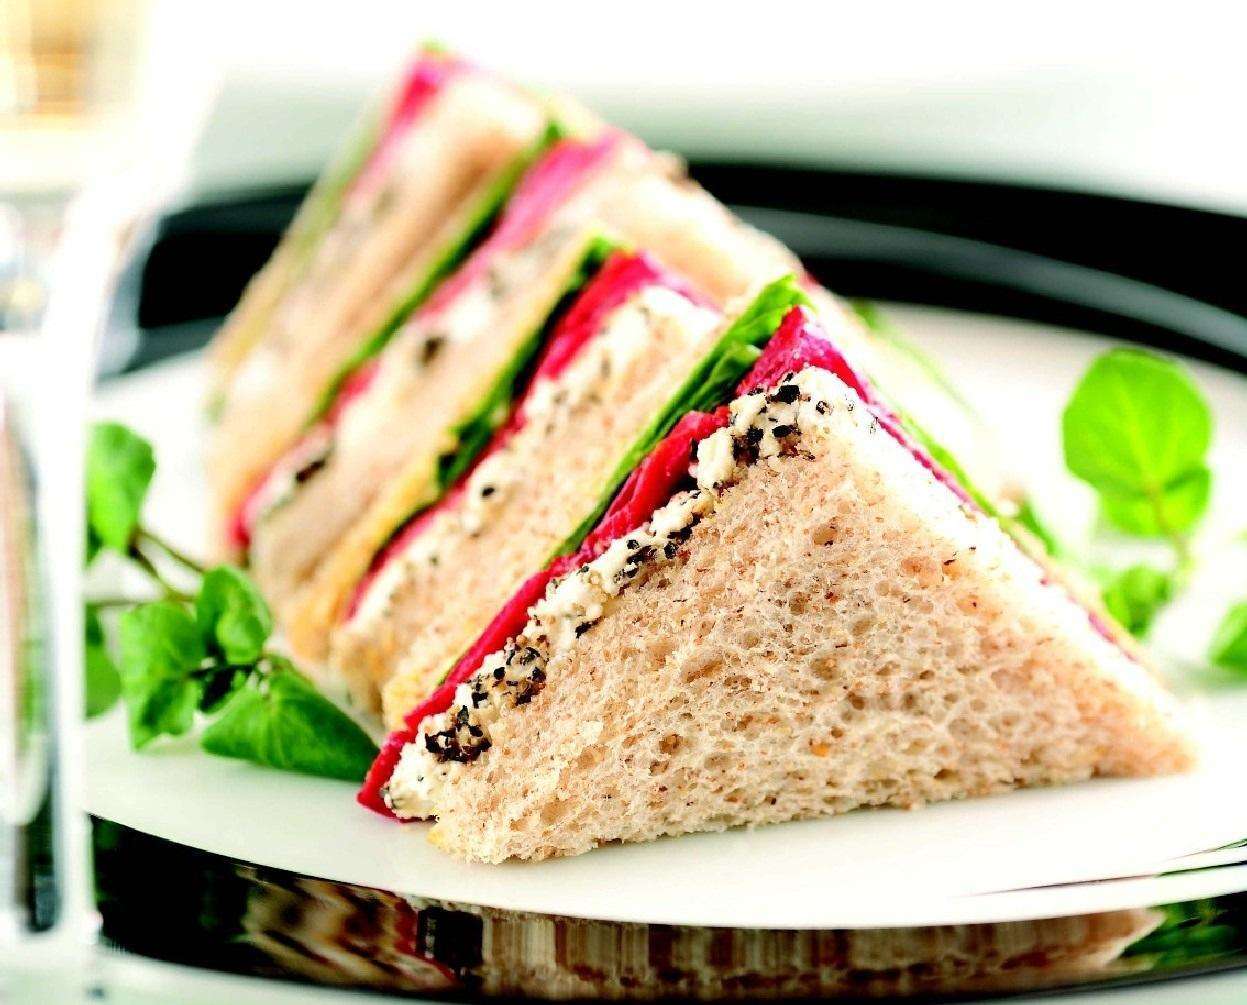 Big Sandwich Pictures, Photos - Hd Image Of Sandwich , HD Wallpaper & Backgrounds